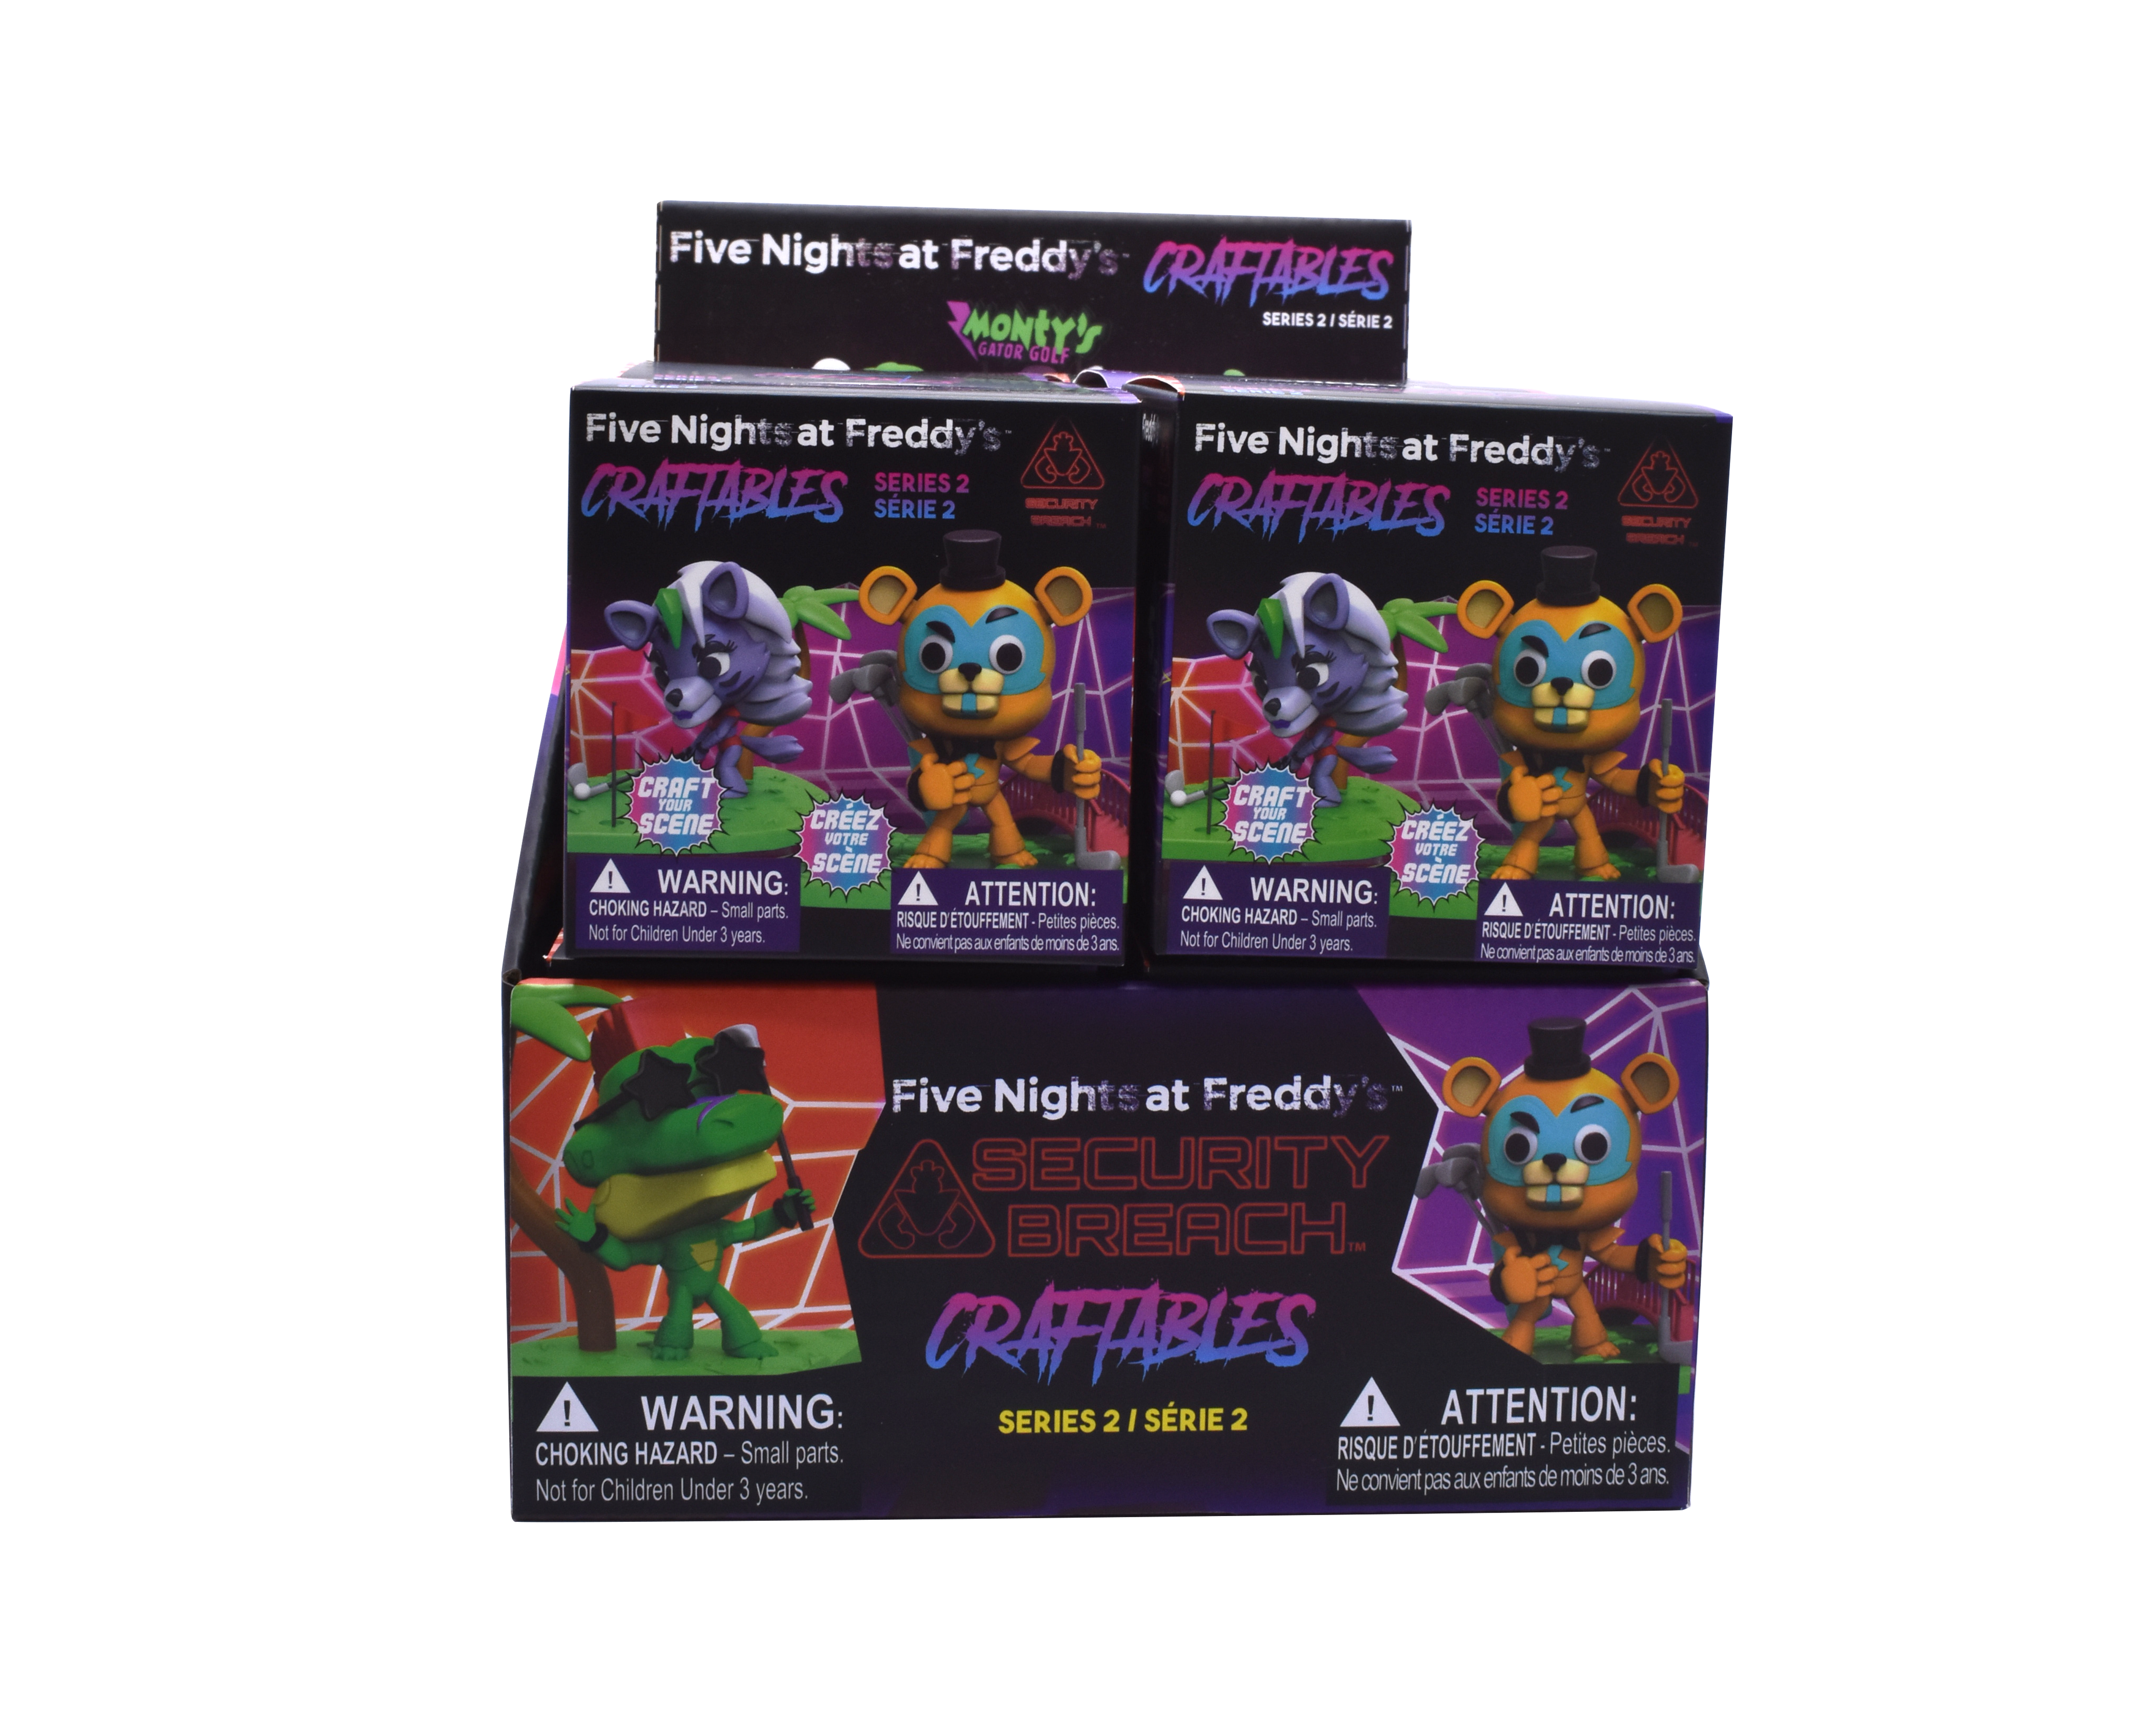 Just Toys Five Nights At Freddy's Security Breach Craftables - Series 2